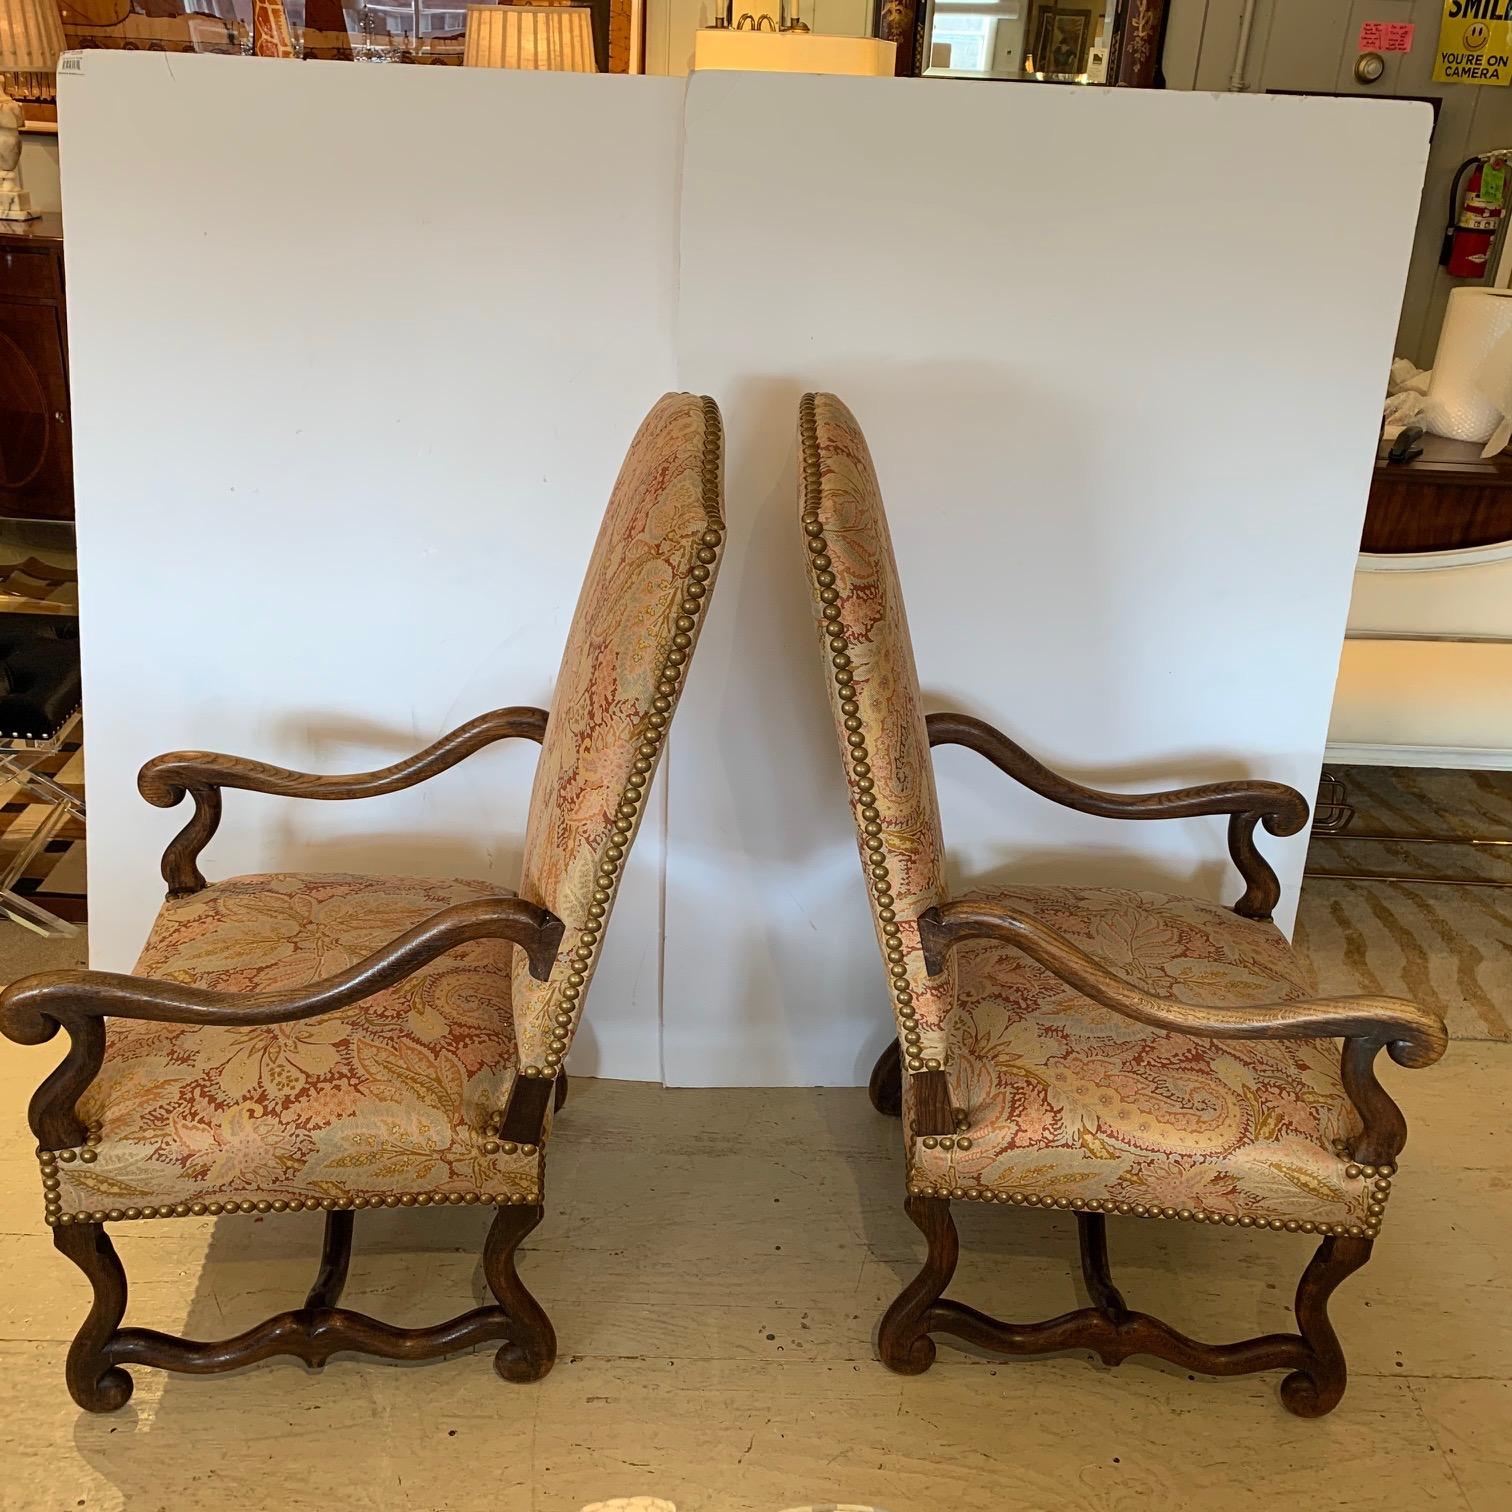 A classy pair of antique English armchairs having curved walnut arms, undulating stretchers and curved feet. Upholstery within the last 10 years is top of the line earth colored paisley and floral Brunschwig and Fils.
Measures: 47” H x 23” W x 29”